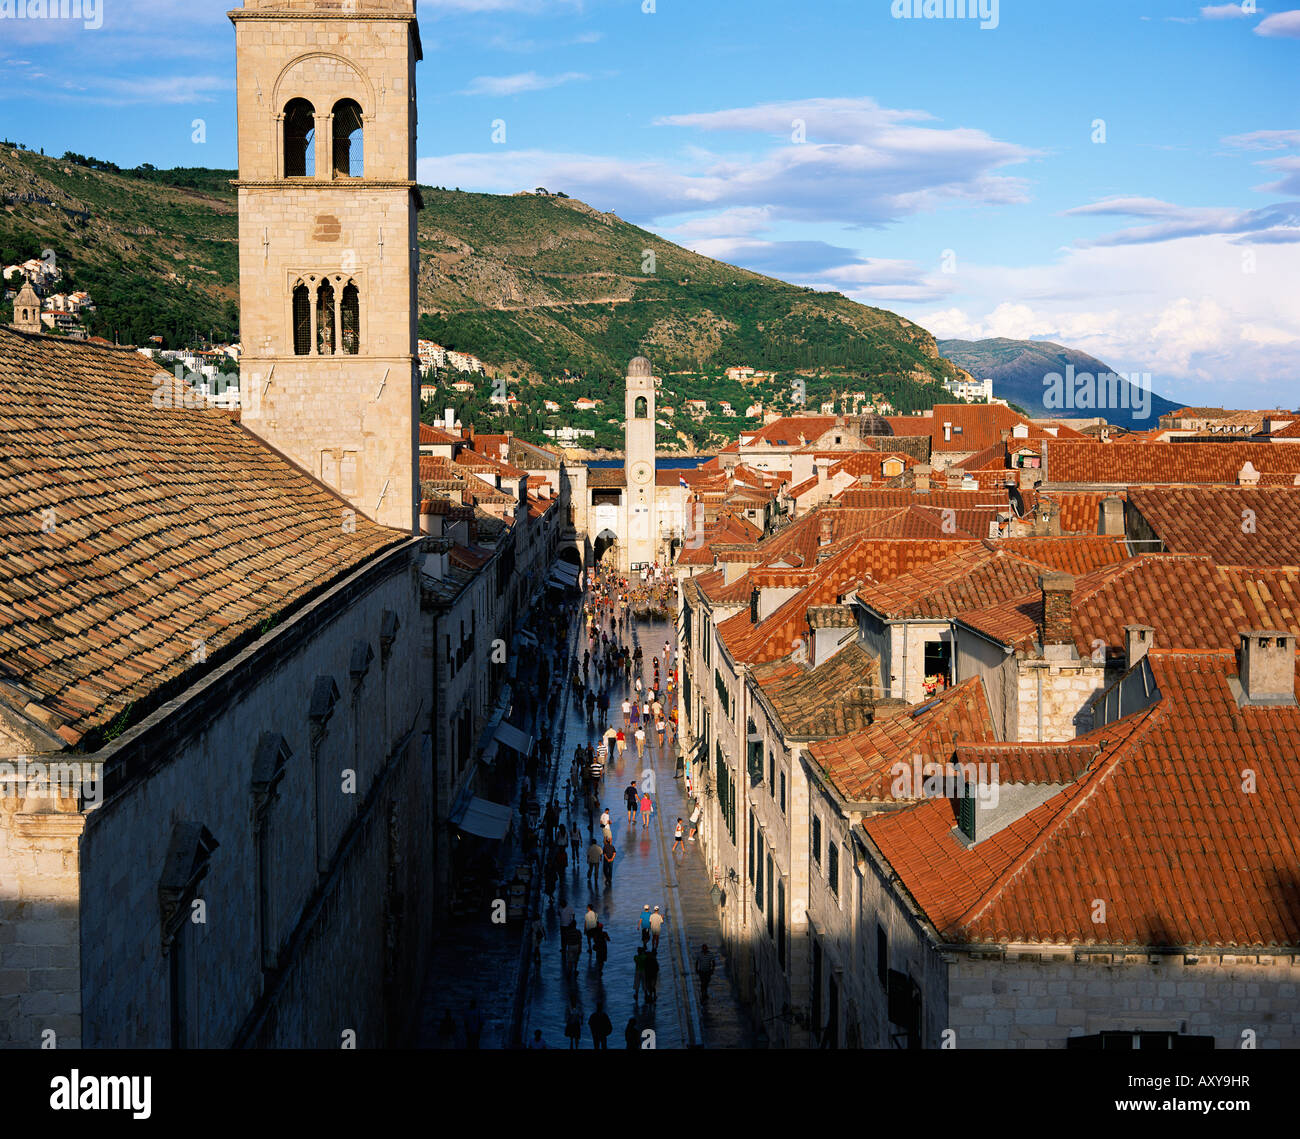 Elevated view along the pedestrian street of Placa to the clock tower, UNESCO World Heritage Site, Dubrovnik, Croatia, Europe Stock Photo